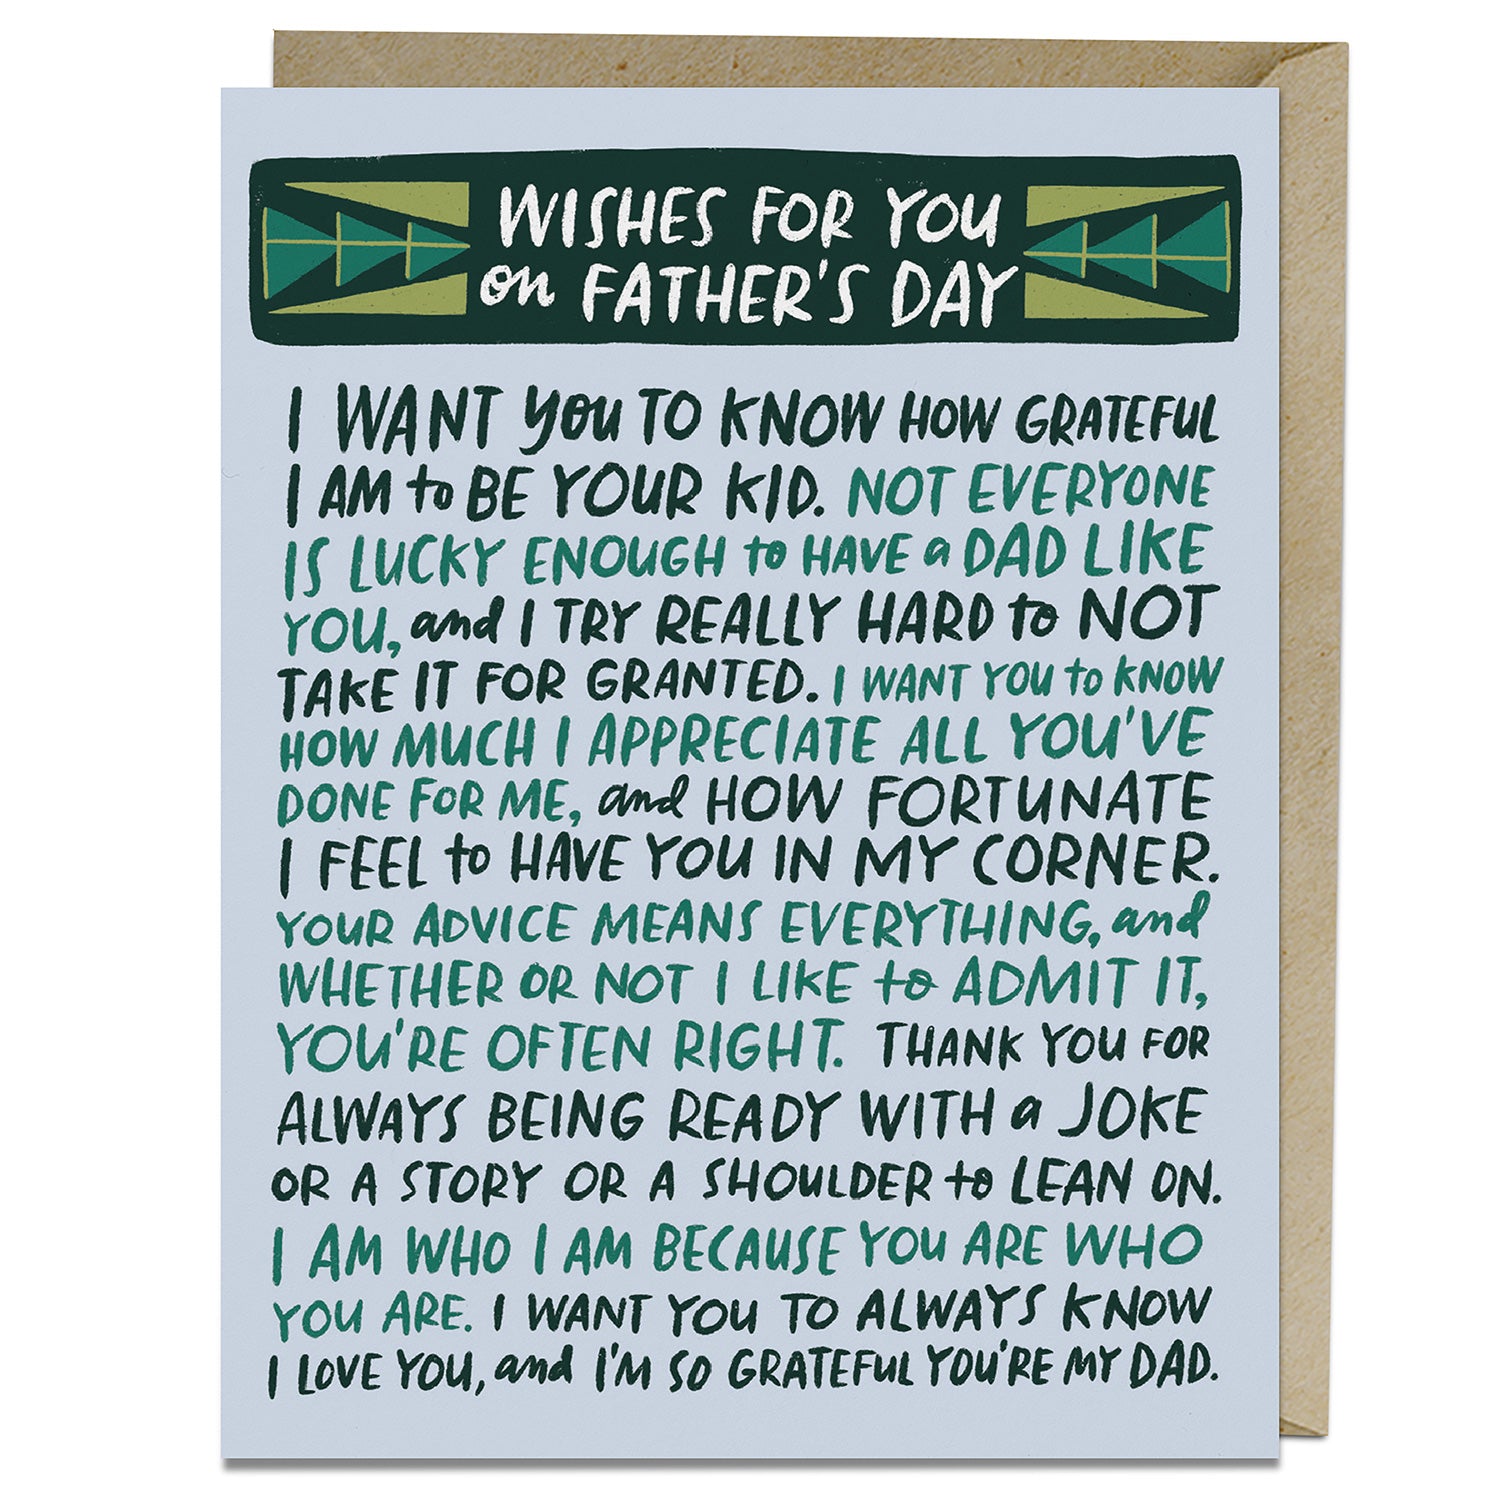 Wishes For You Father's Day Card